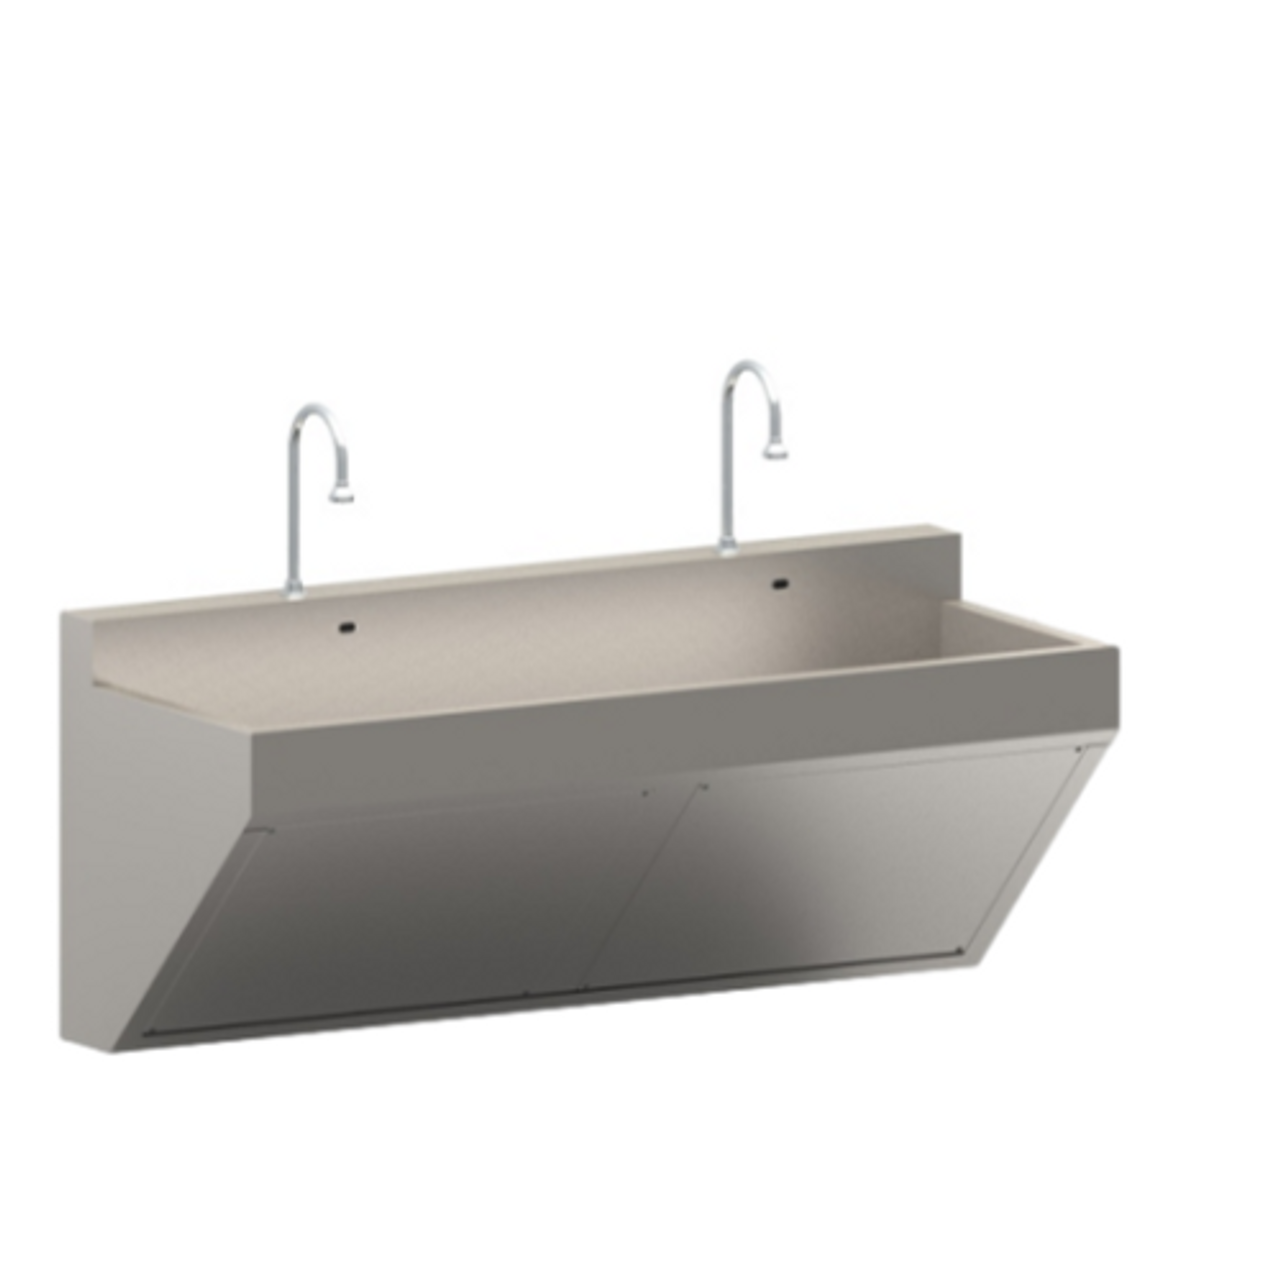 New Stainless Steel Scrub Sink With Eye/Face Wash - Whitehall Mfg